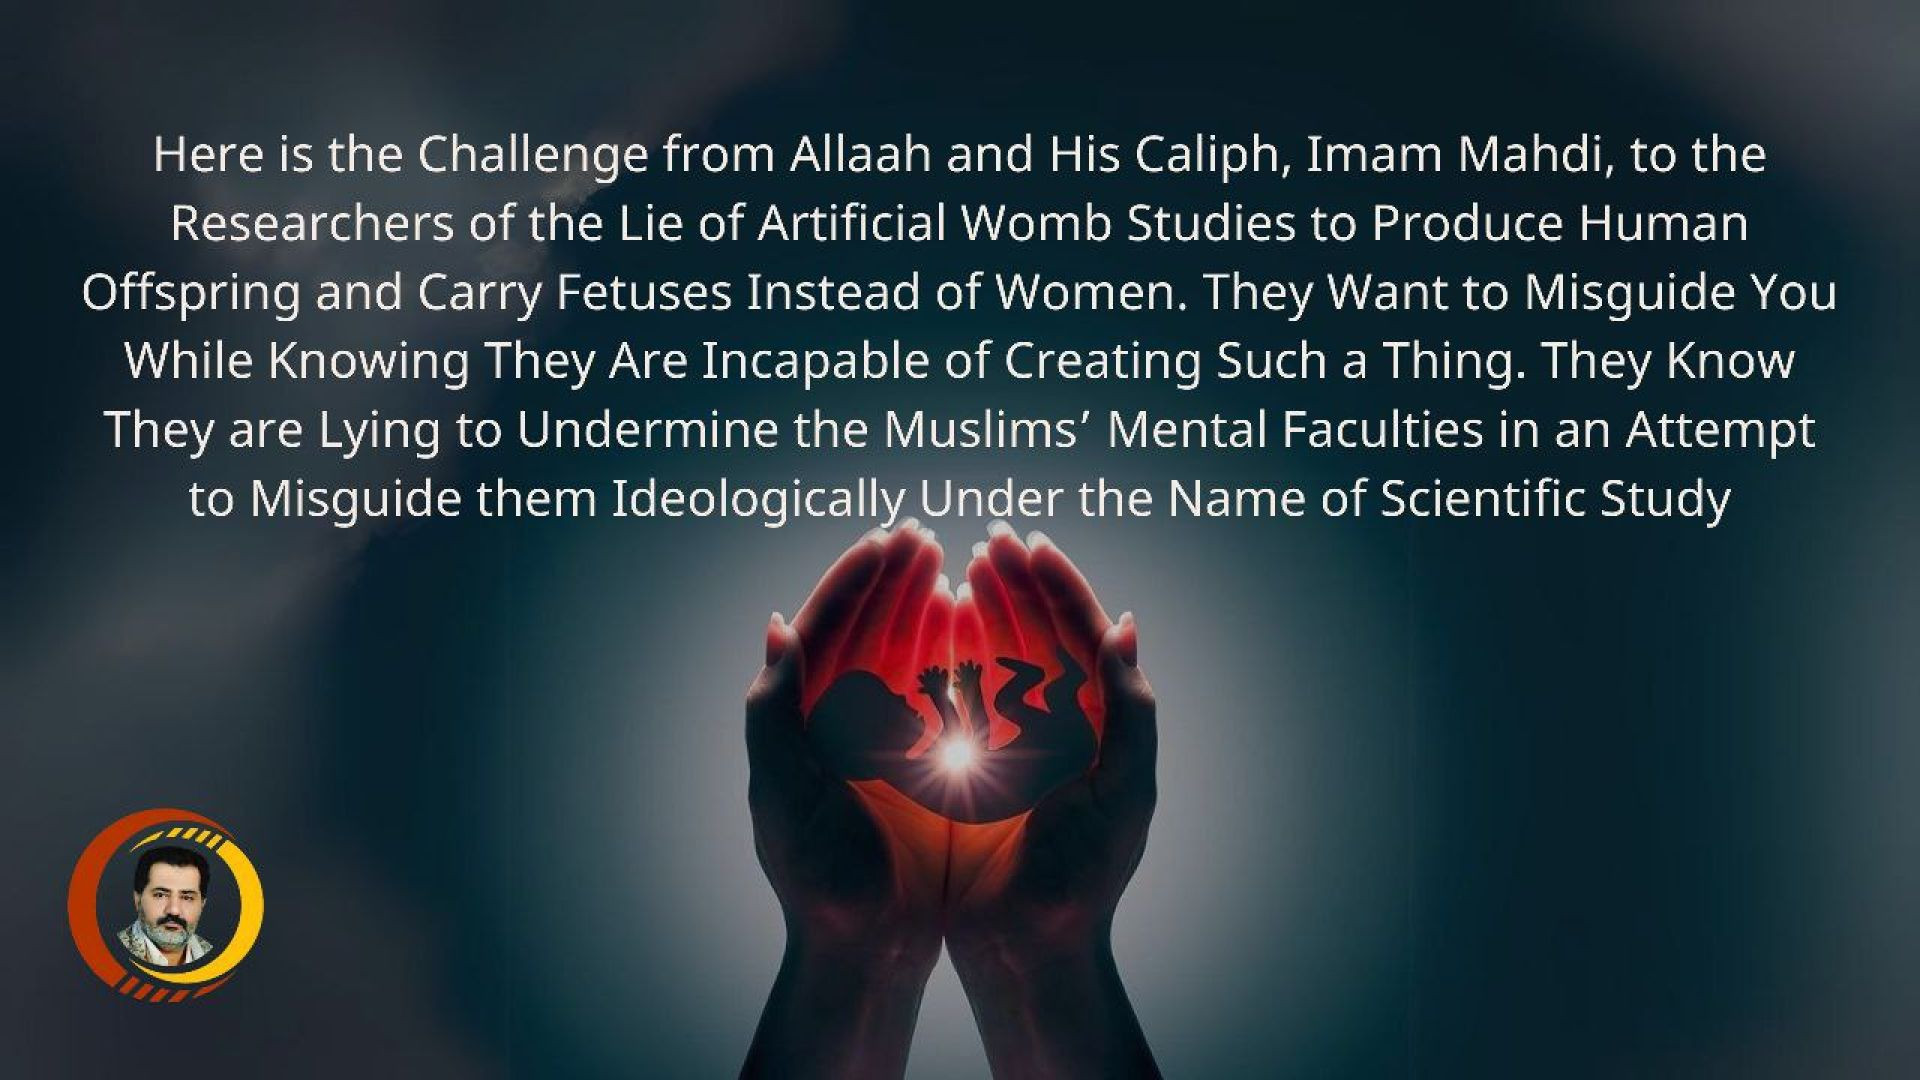 Allah and His caliph challenge the researchers of the lie of the artificial womb studies to produce human offsprings..